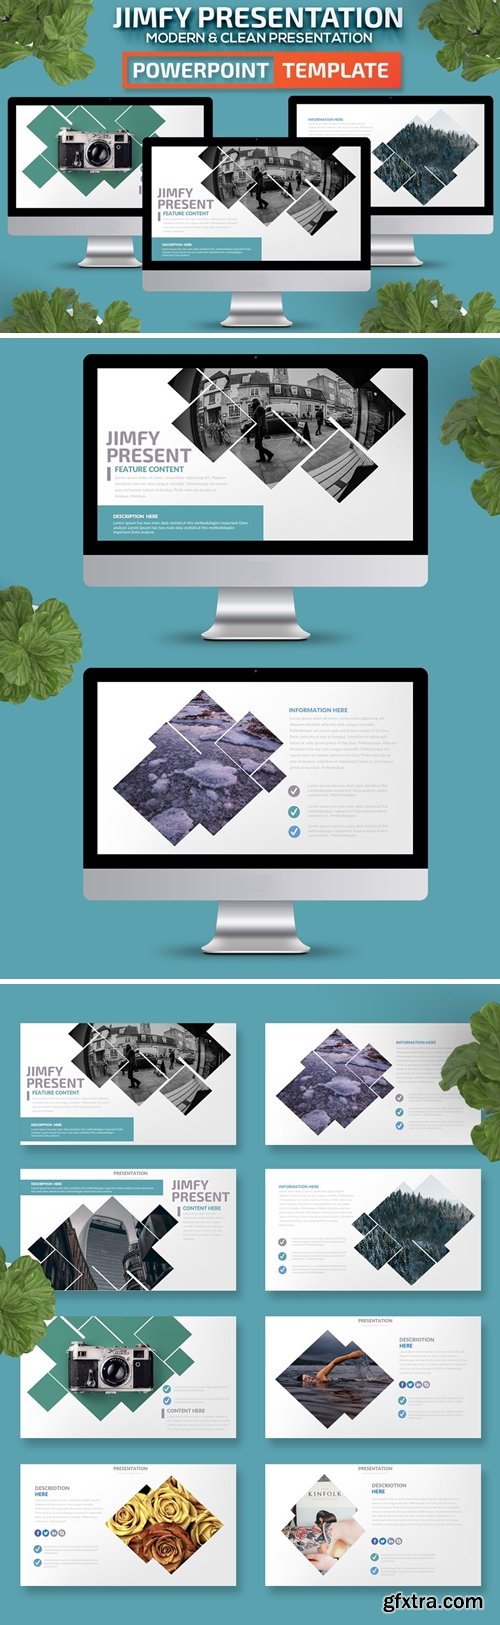 Jimfy Powerpoint and Keynote Presentation Template